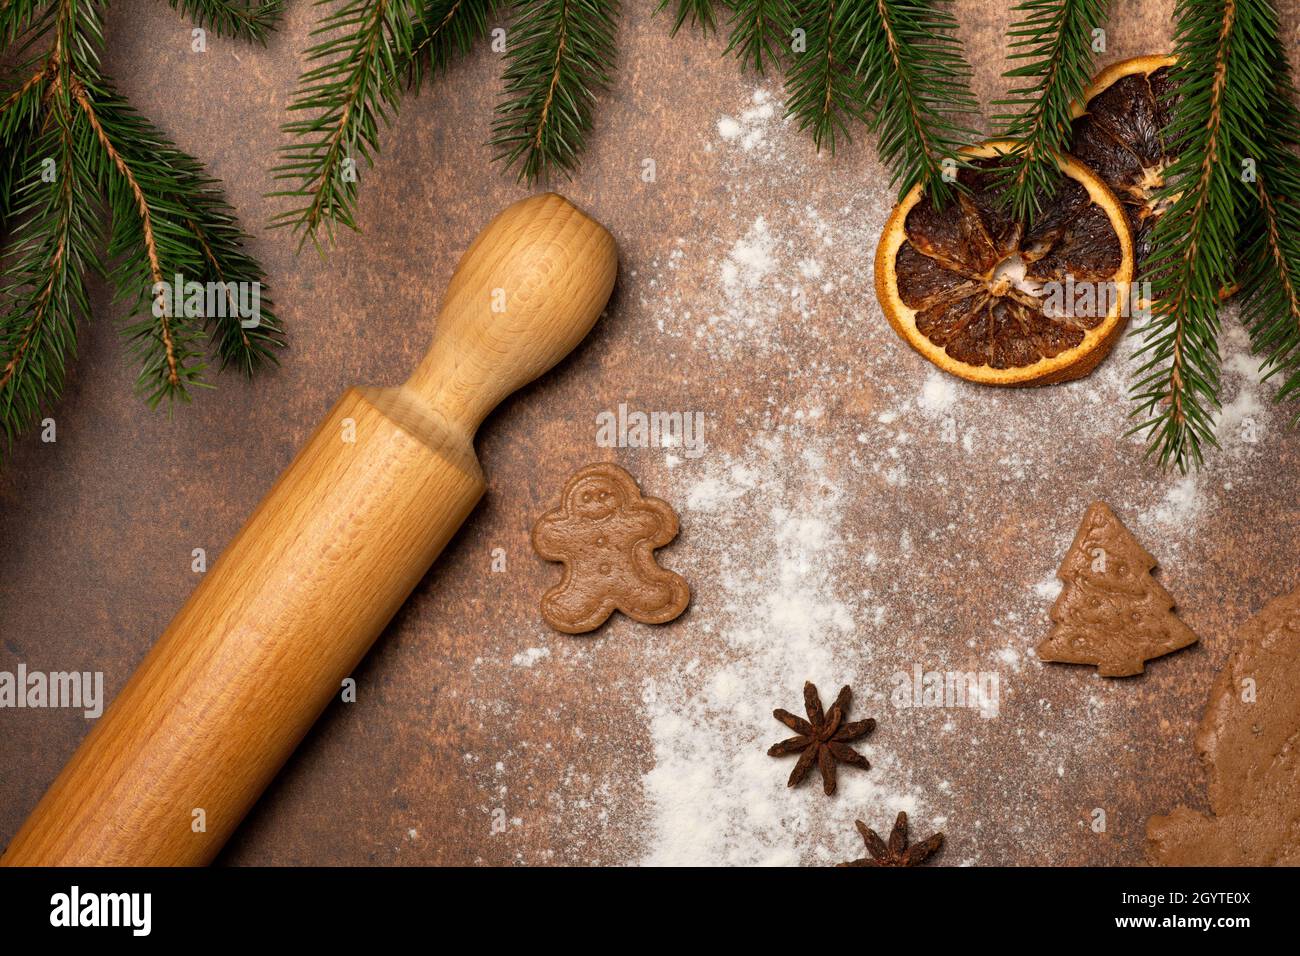 Gingerbread man cookies and Christmas tree cookies, cut of raw gingerbread dough. The work surface is sprinkled with flour. Stock Photo